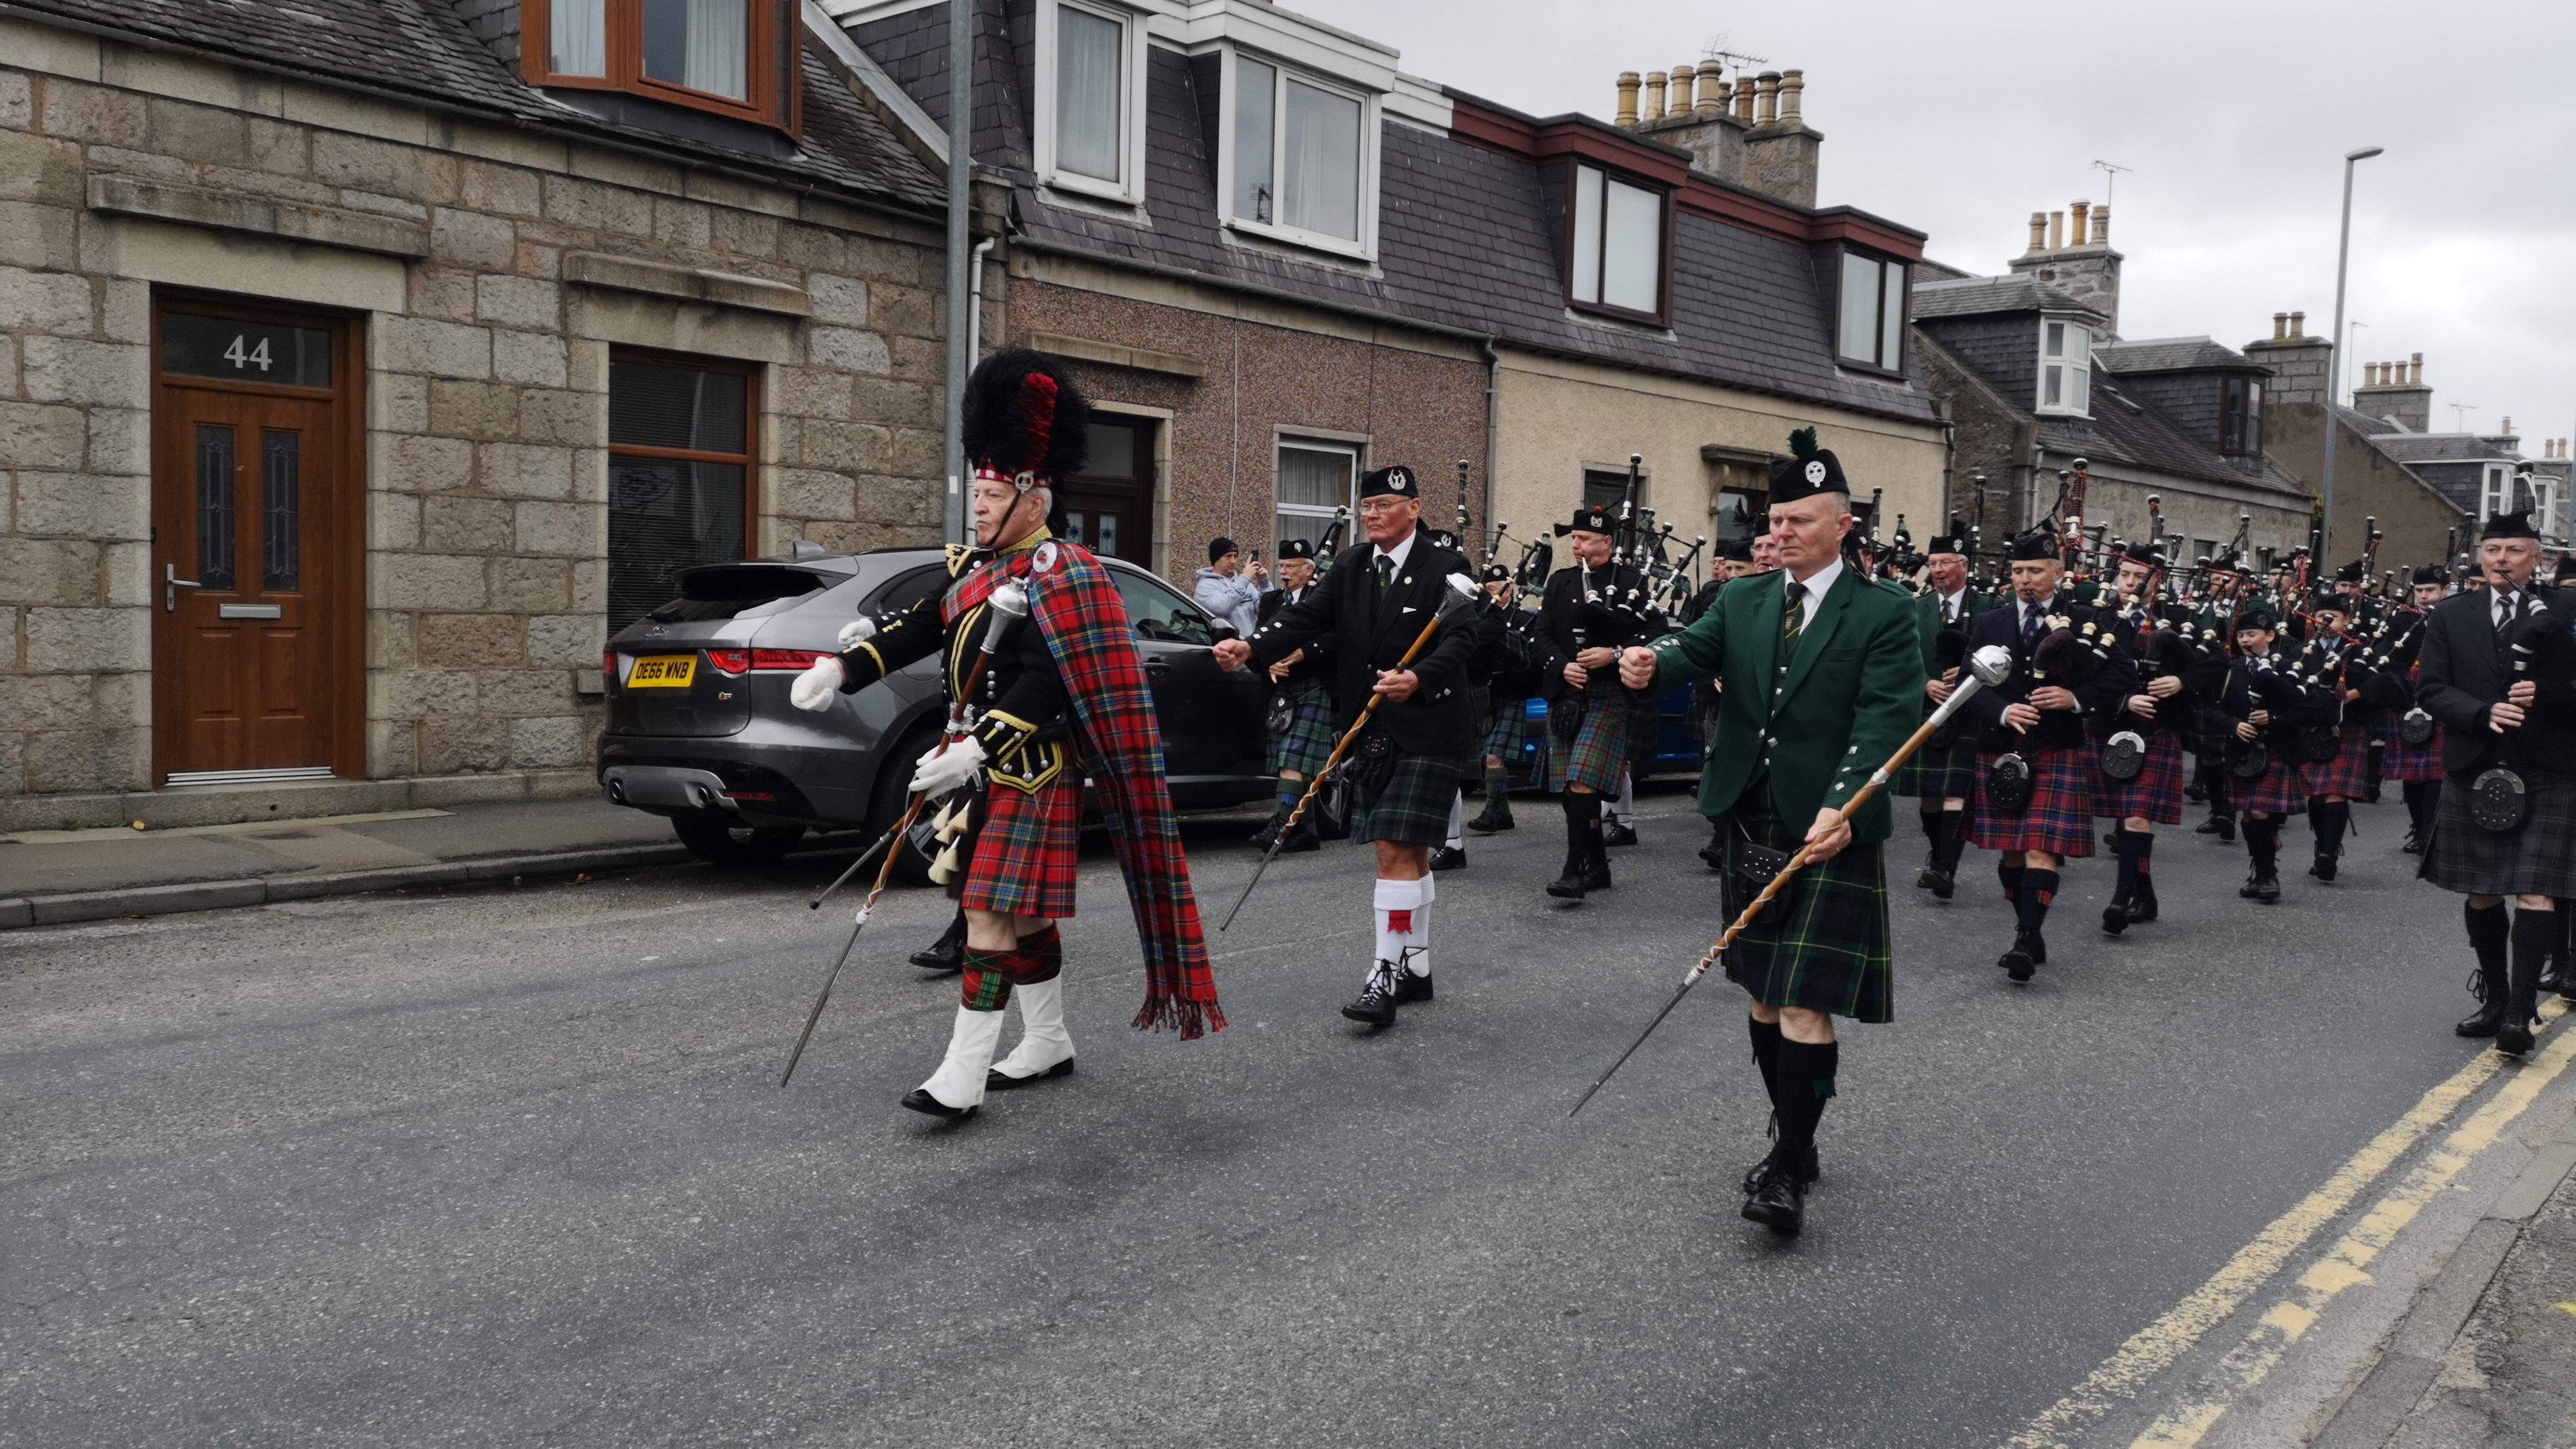 The pipe band parade through Inverurie